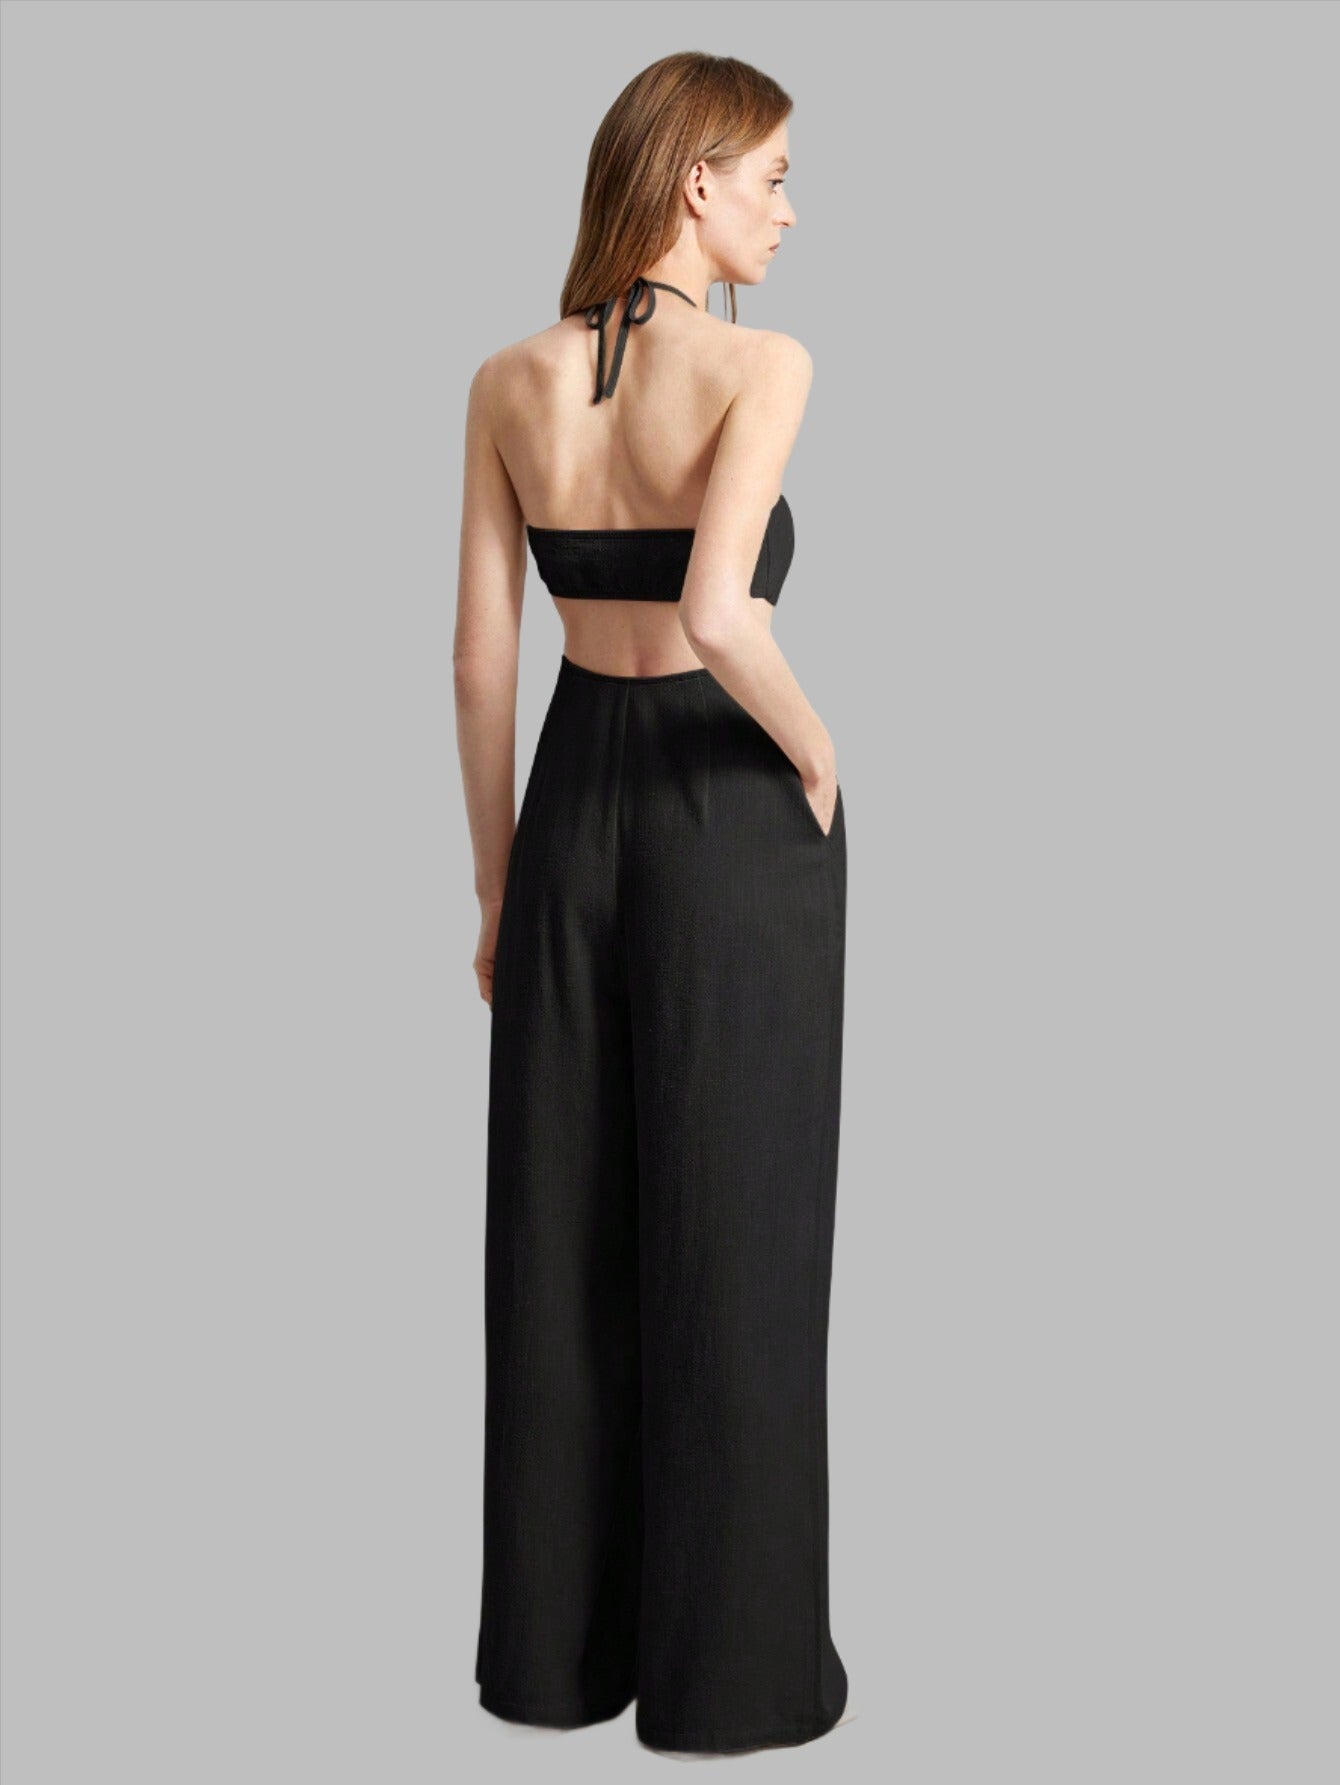 LLstyle Women Fashionable Hollow Out Waist Strap Jumpsuit